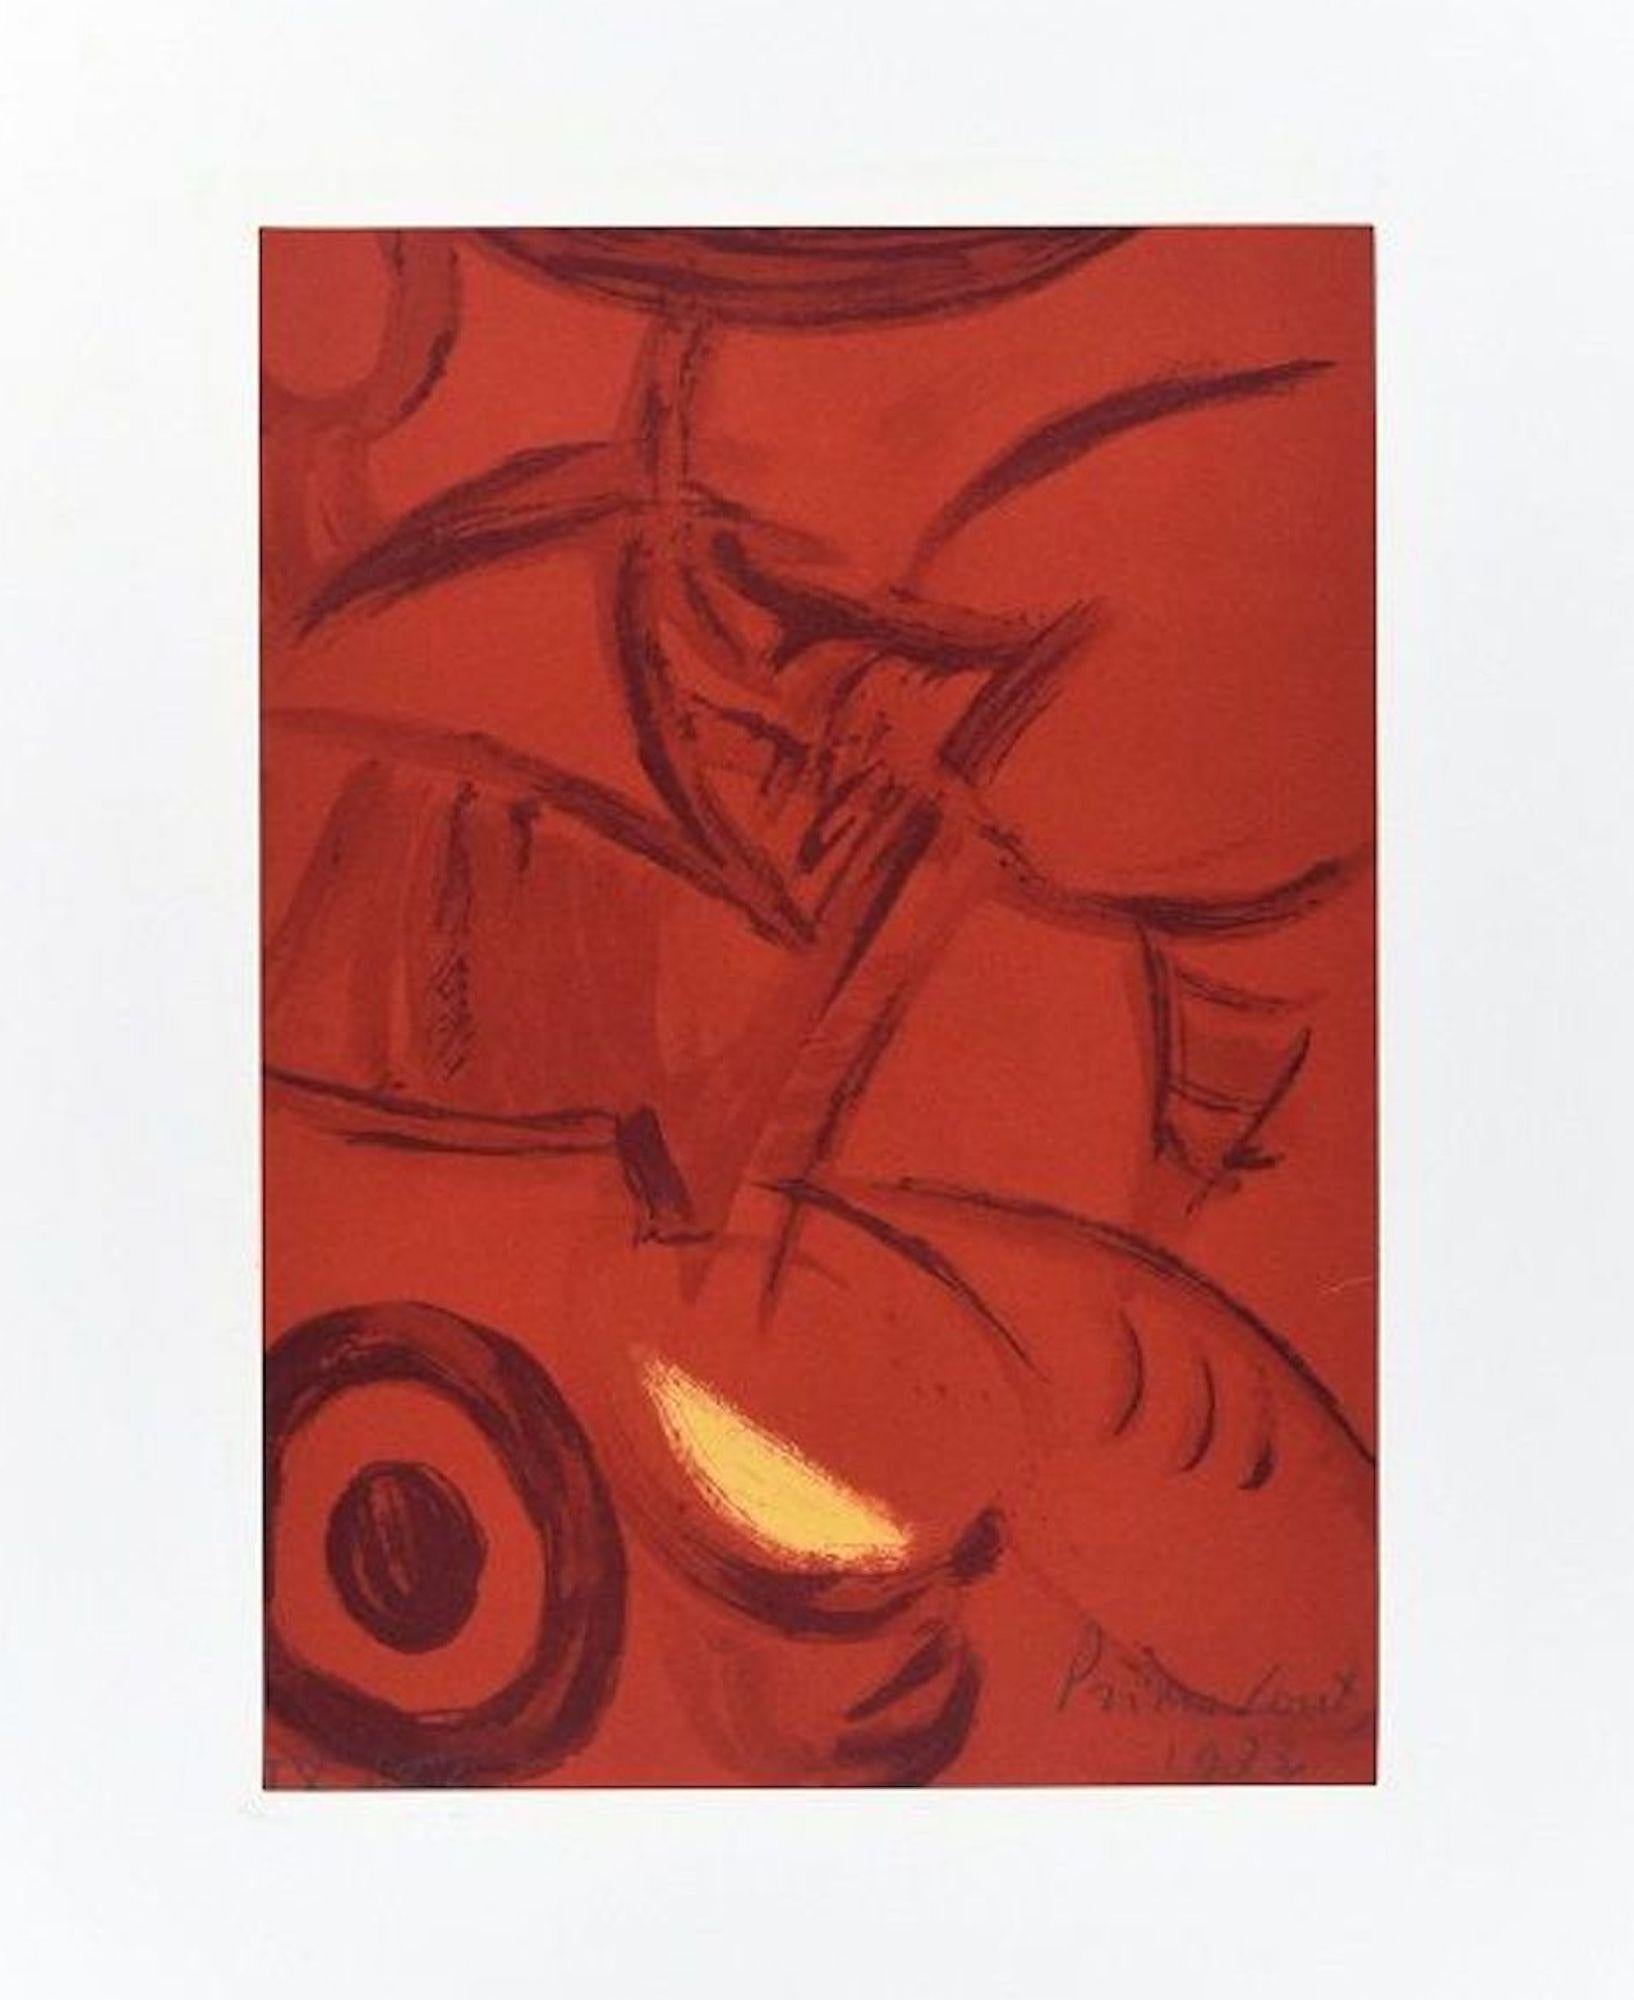 Untitled is a beautiful original colored lithograph on cream-colored paper realized by the Italian artist Primo Conti (1900-1988).

An original print, representing an abstract colorful composition, is hand-signed, dated and numbered in Roman